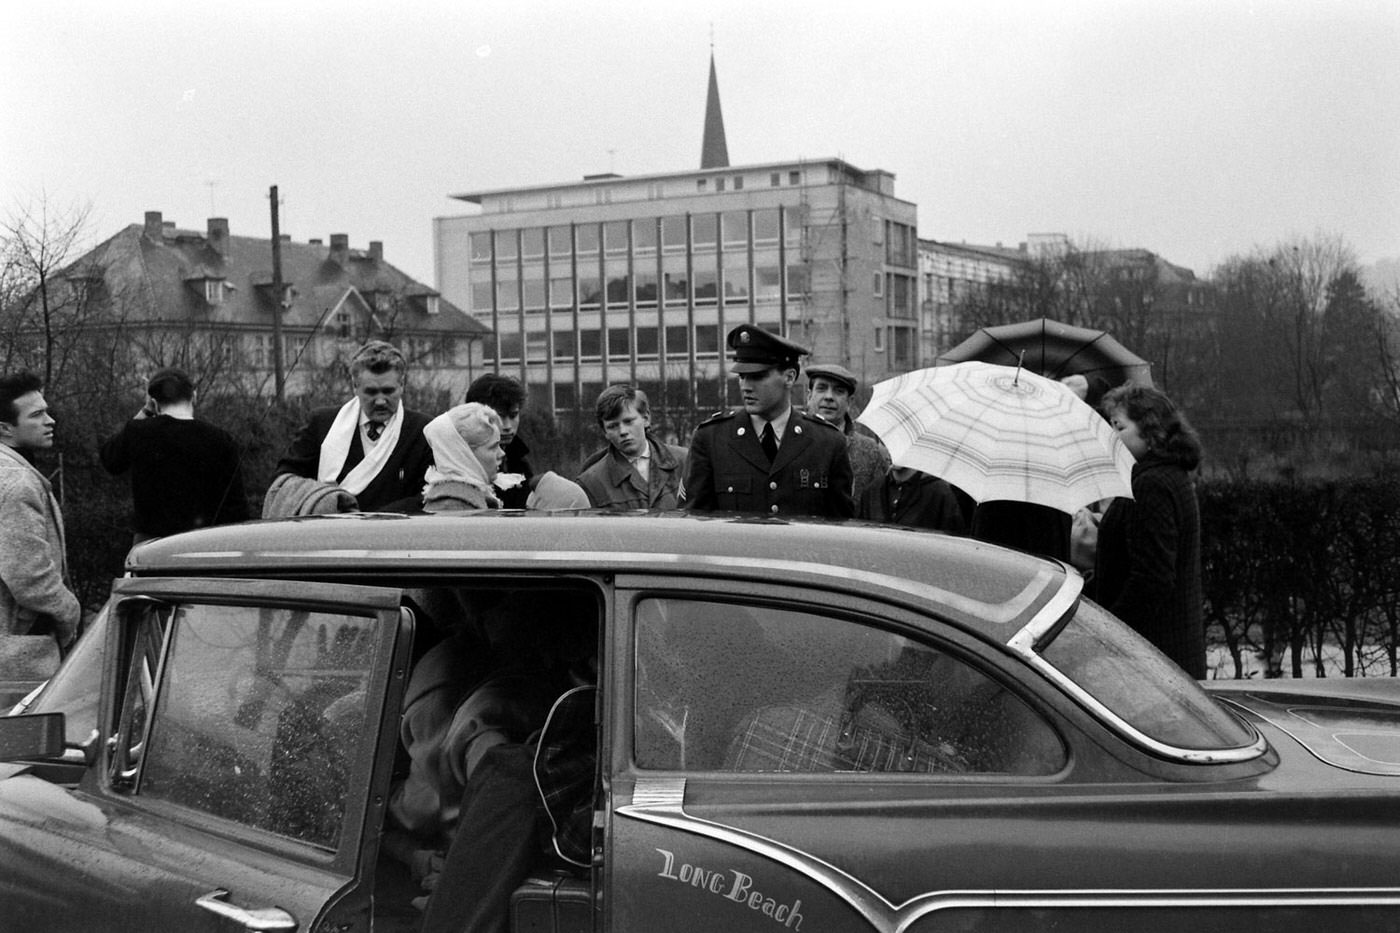 Sgt. Elvis Presley leaves the house he and his family occupied in Bad Nauheim, Germany, March 1960.